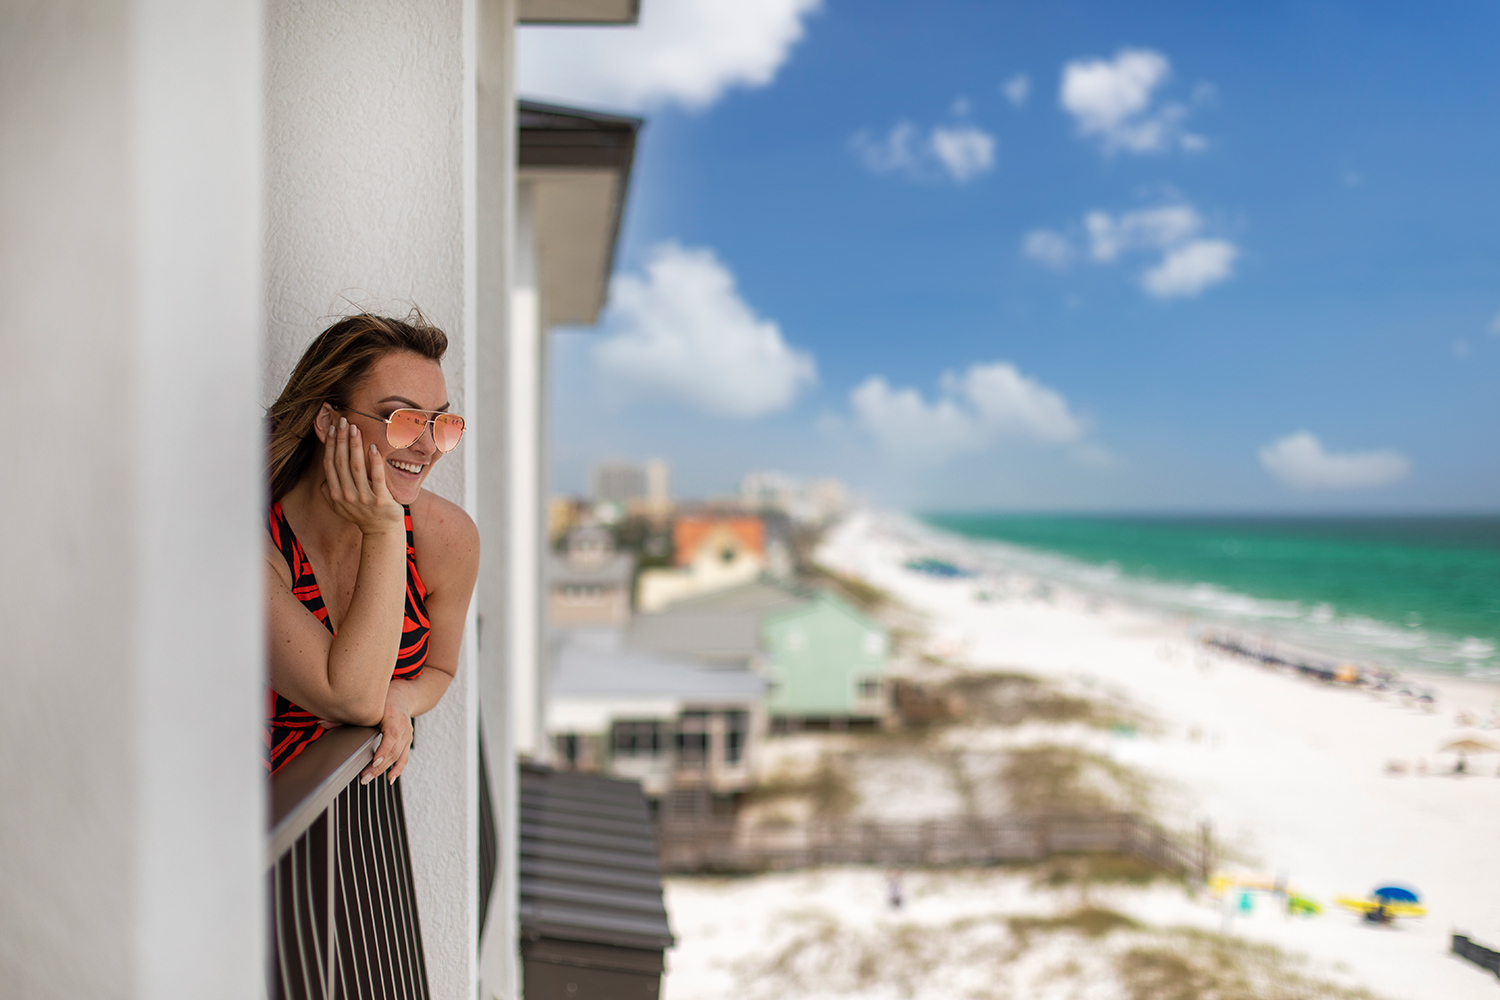 Where to Stay in Destin